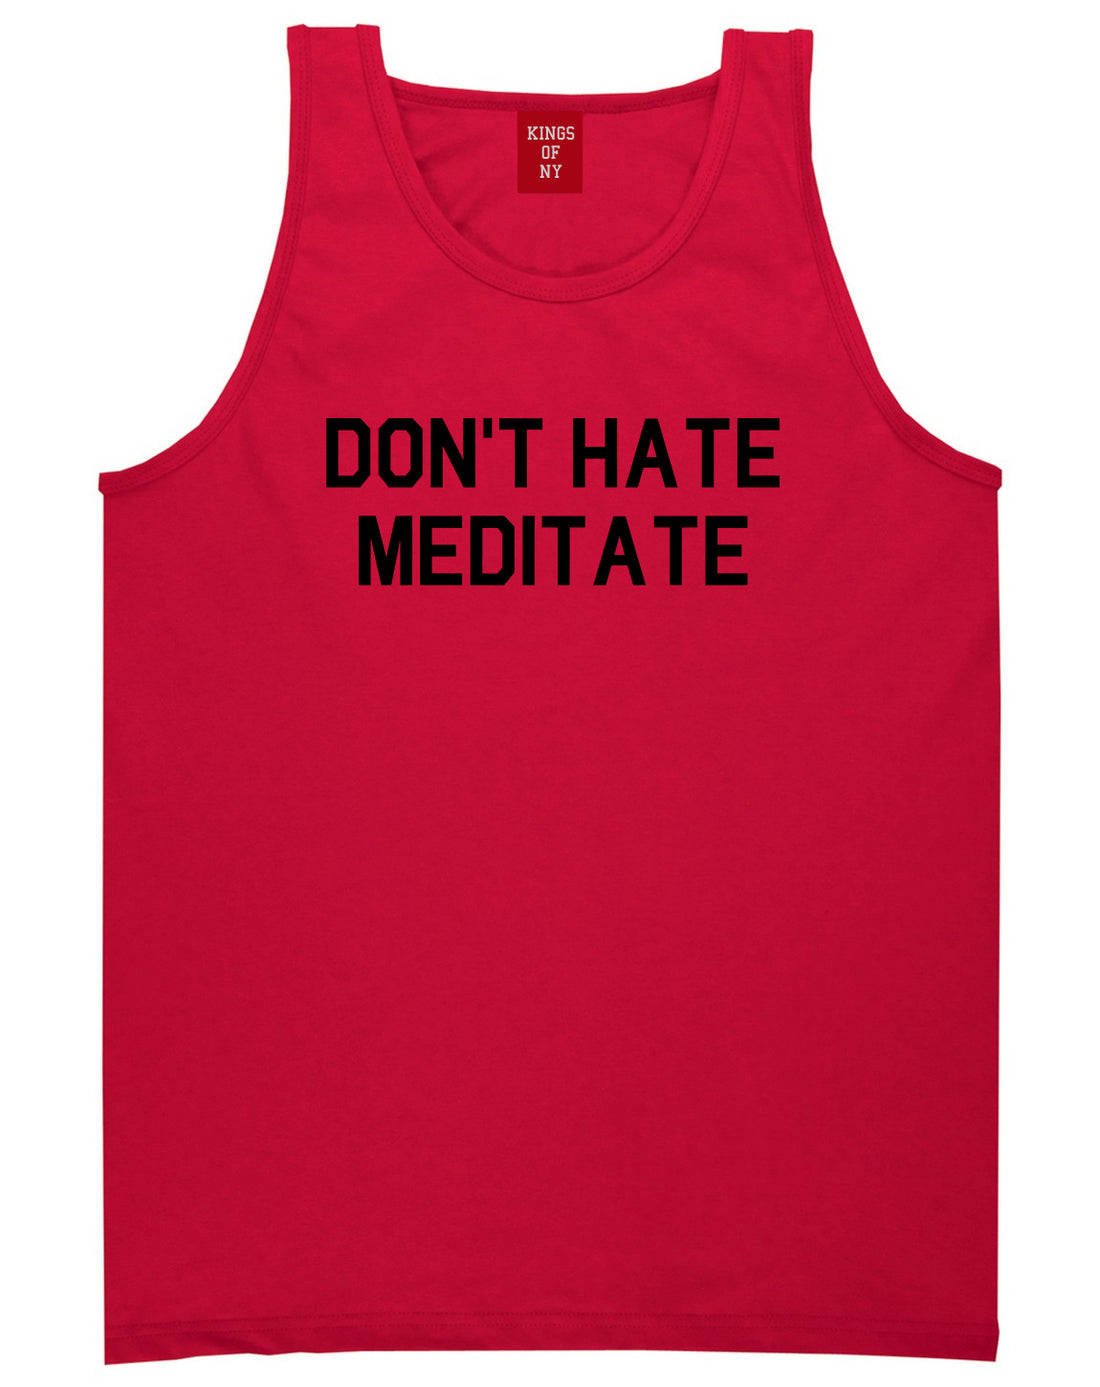 Dont_Hate_Meditate Mens Red Tank Top Shirt by Kings Of NY